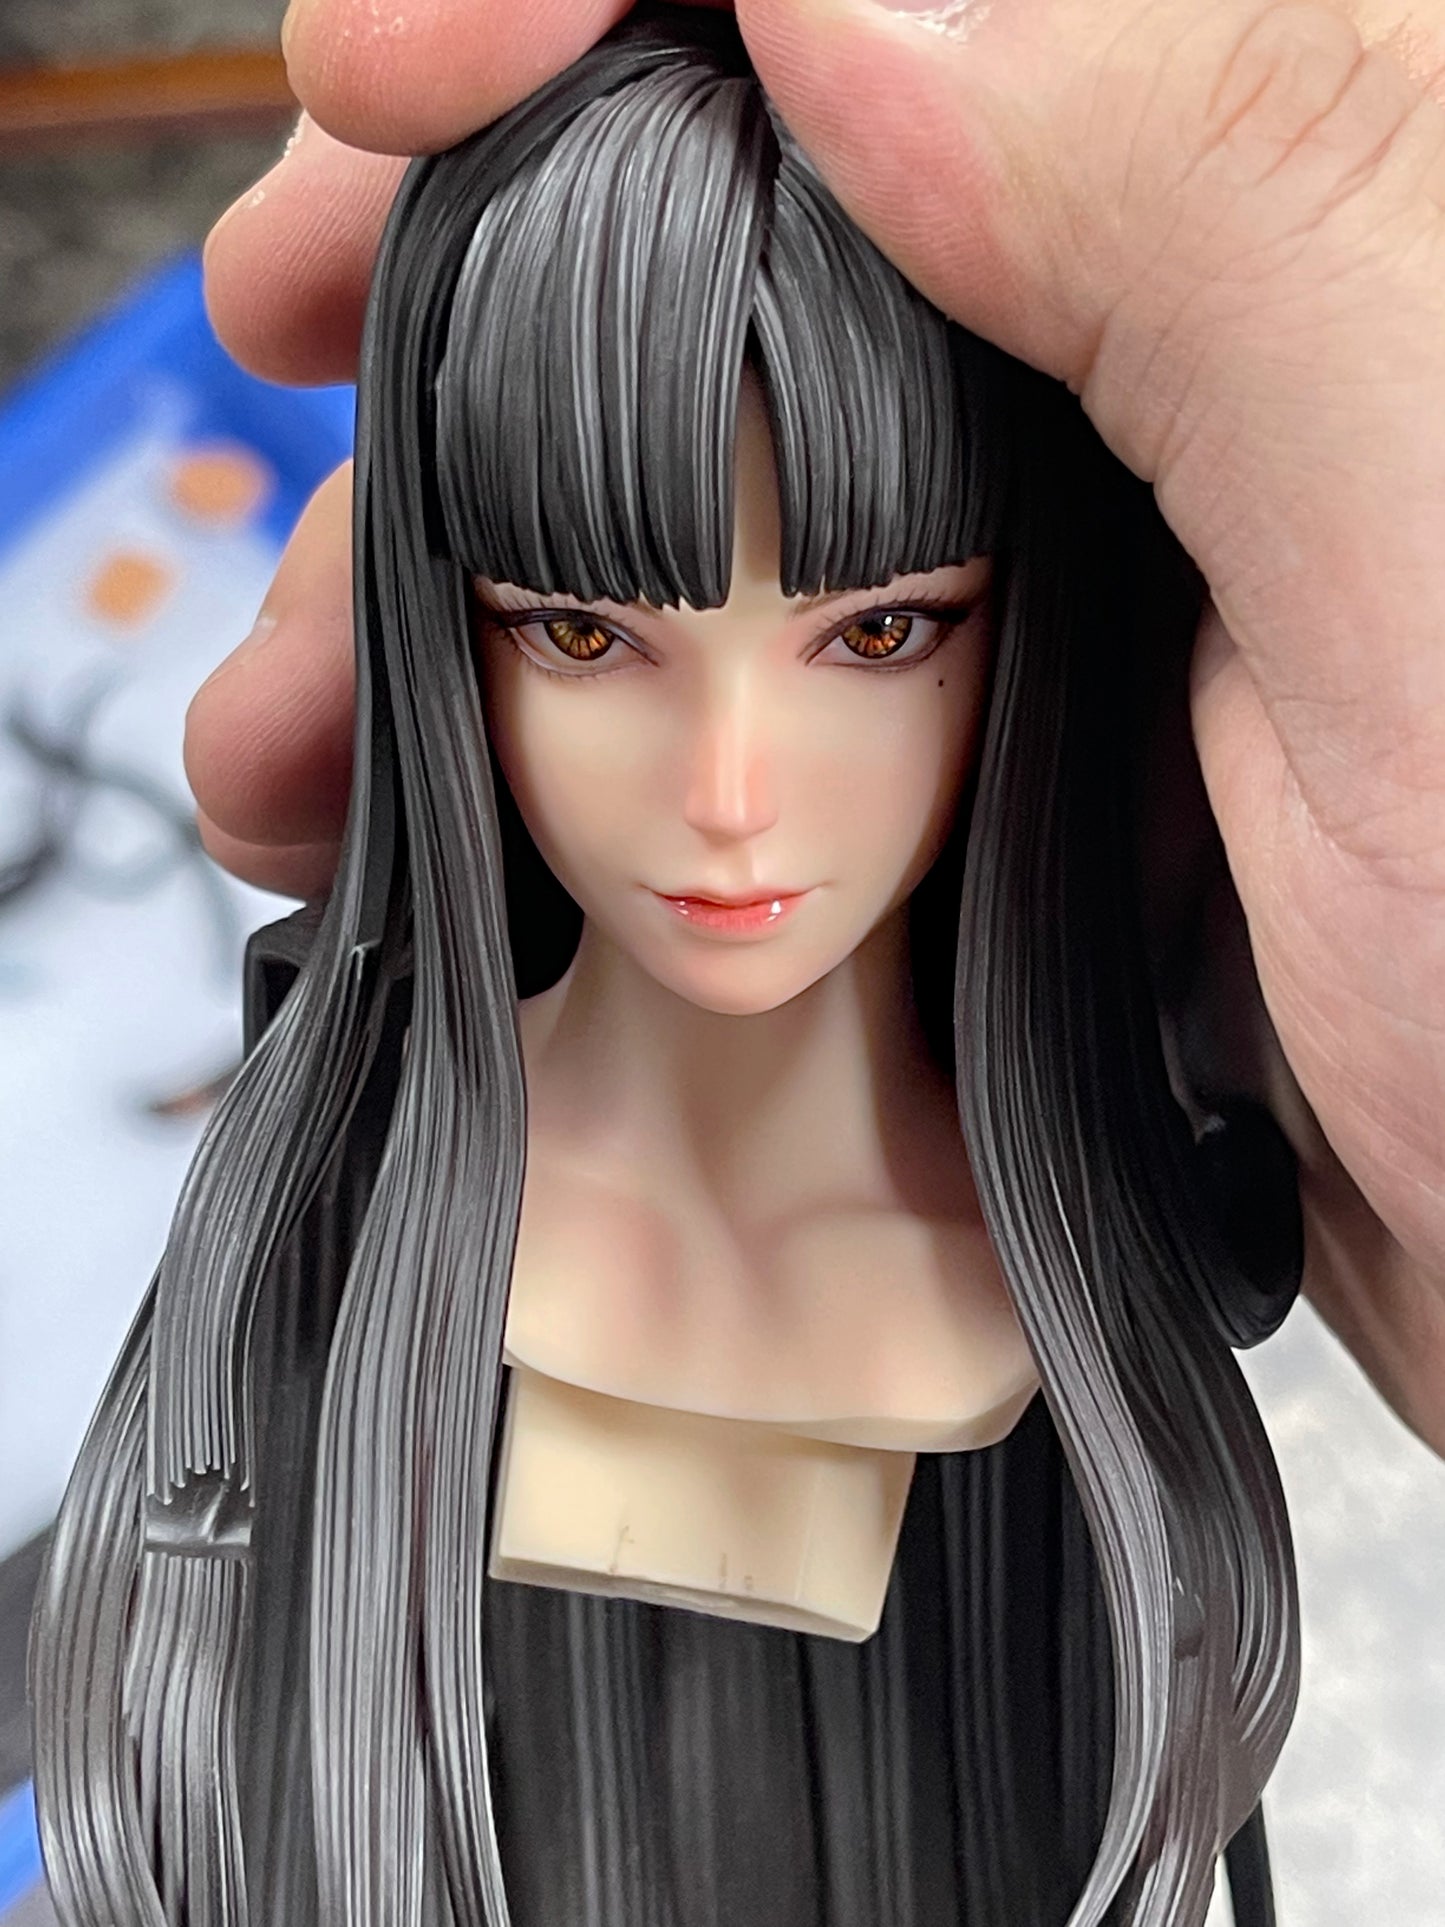 LIMIT STUDIO – JUNJI ITO COLLECTION: TOMIE KAWAKAMI 1/4 (LICENSED) [SOLD OUT]